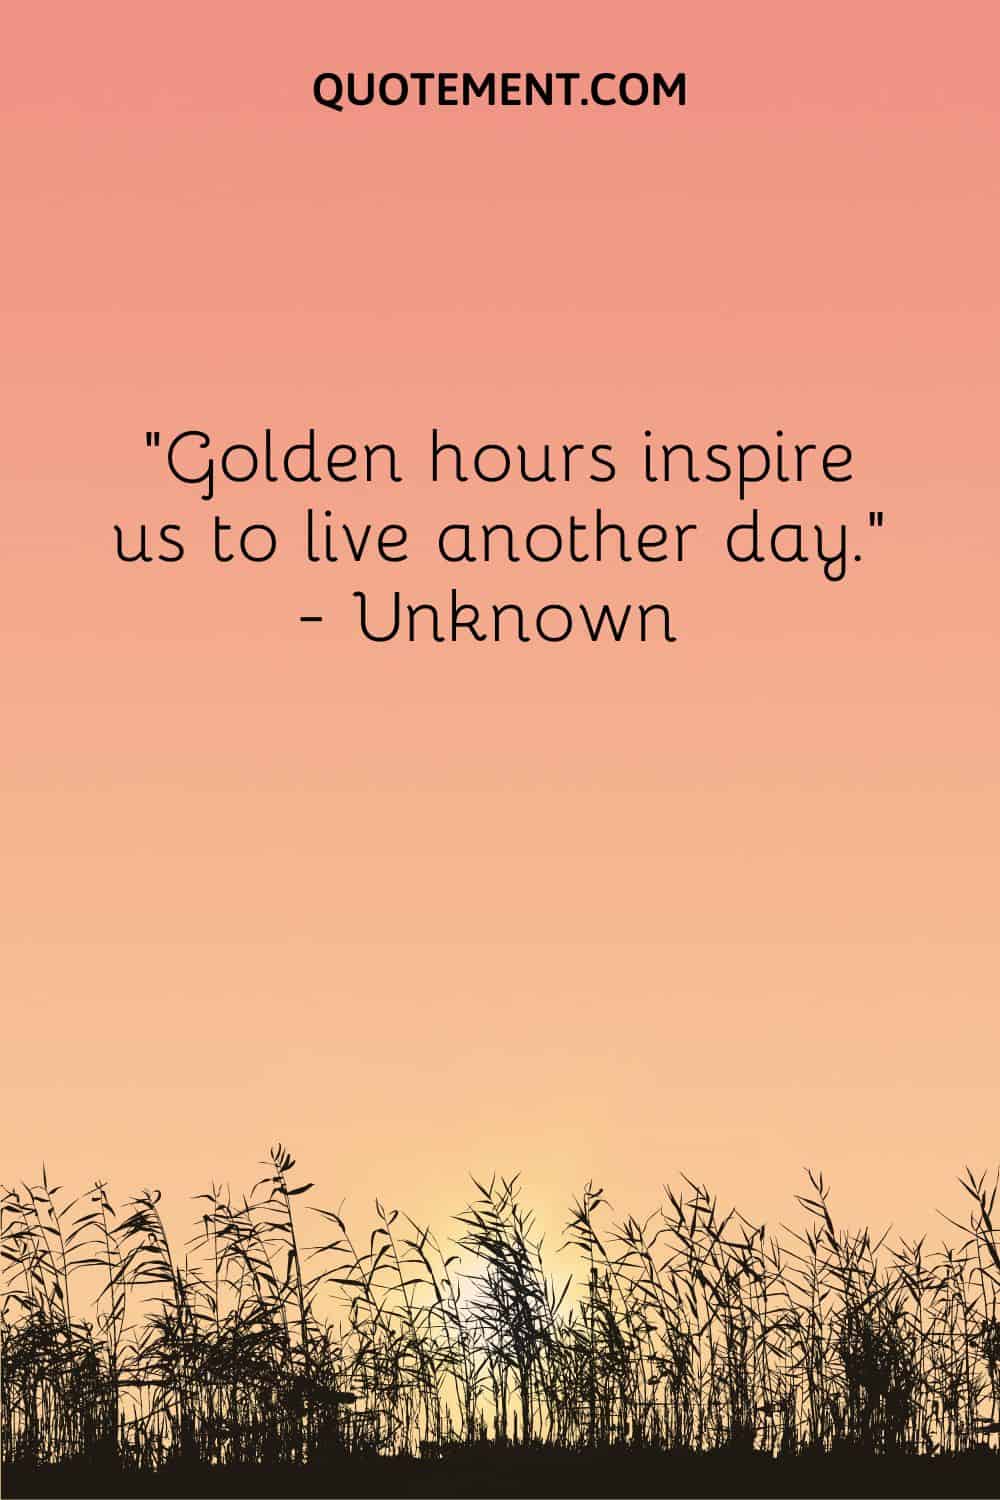 Golden hours inspire us to live another day